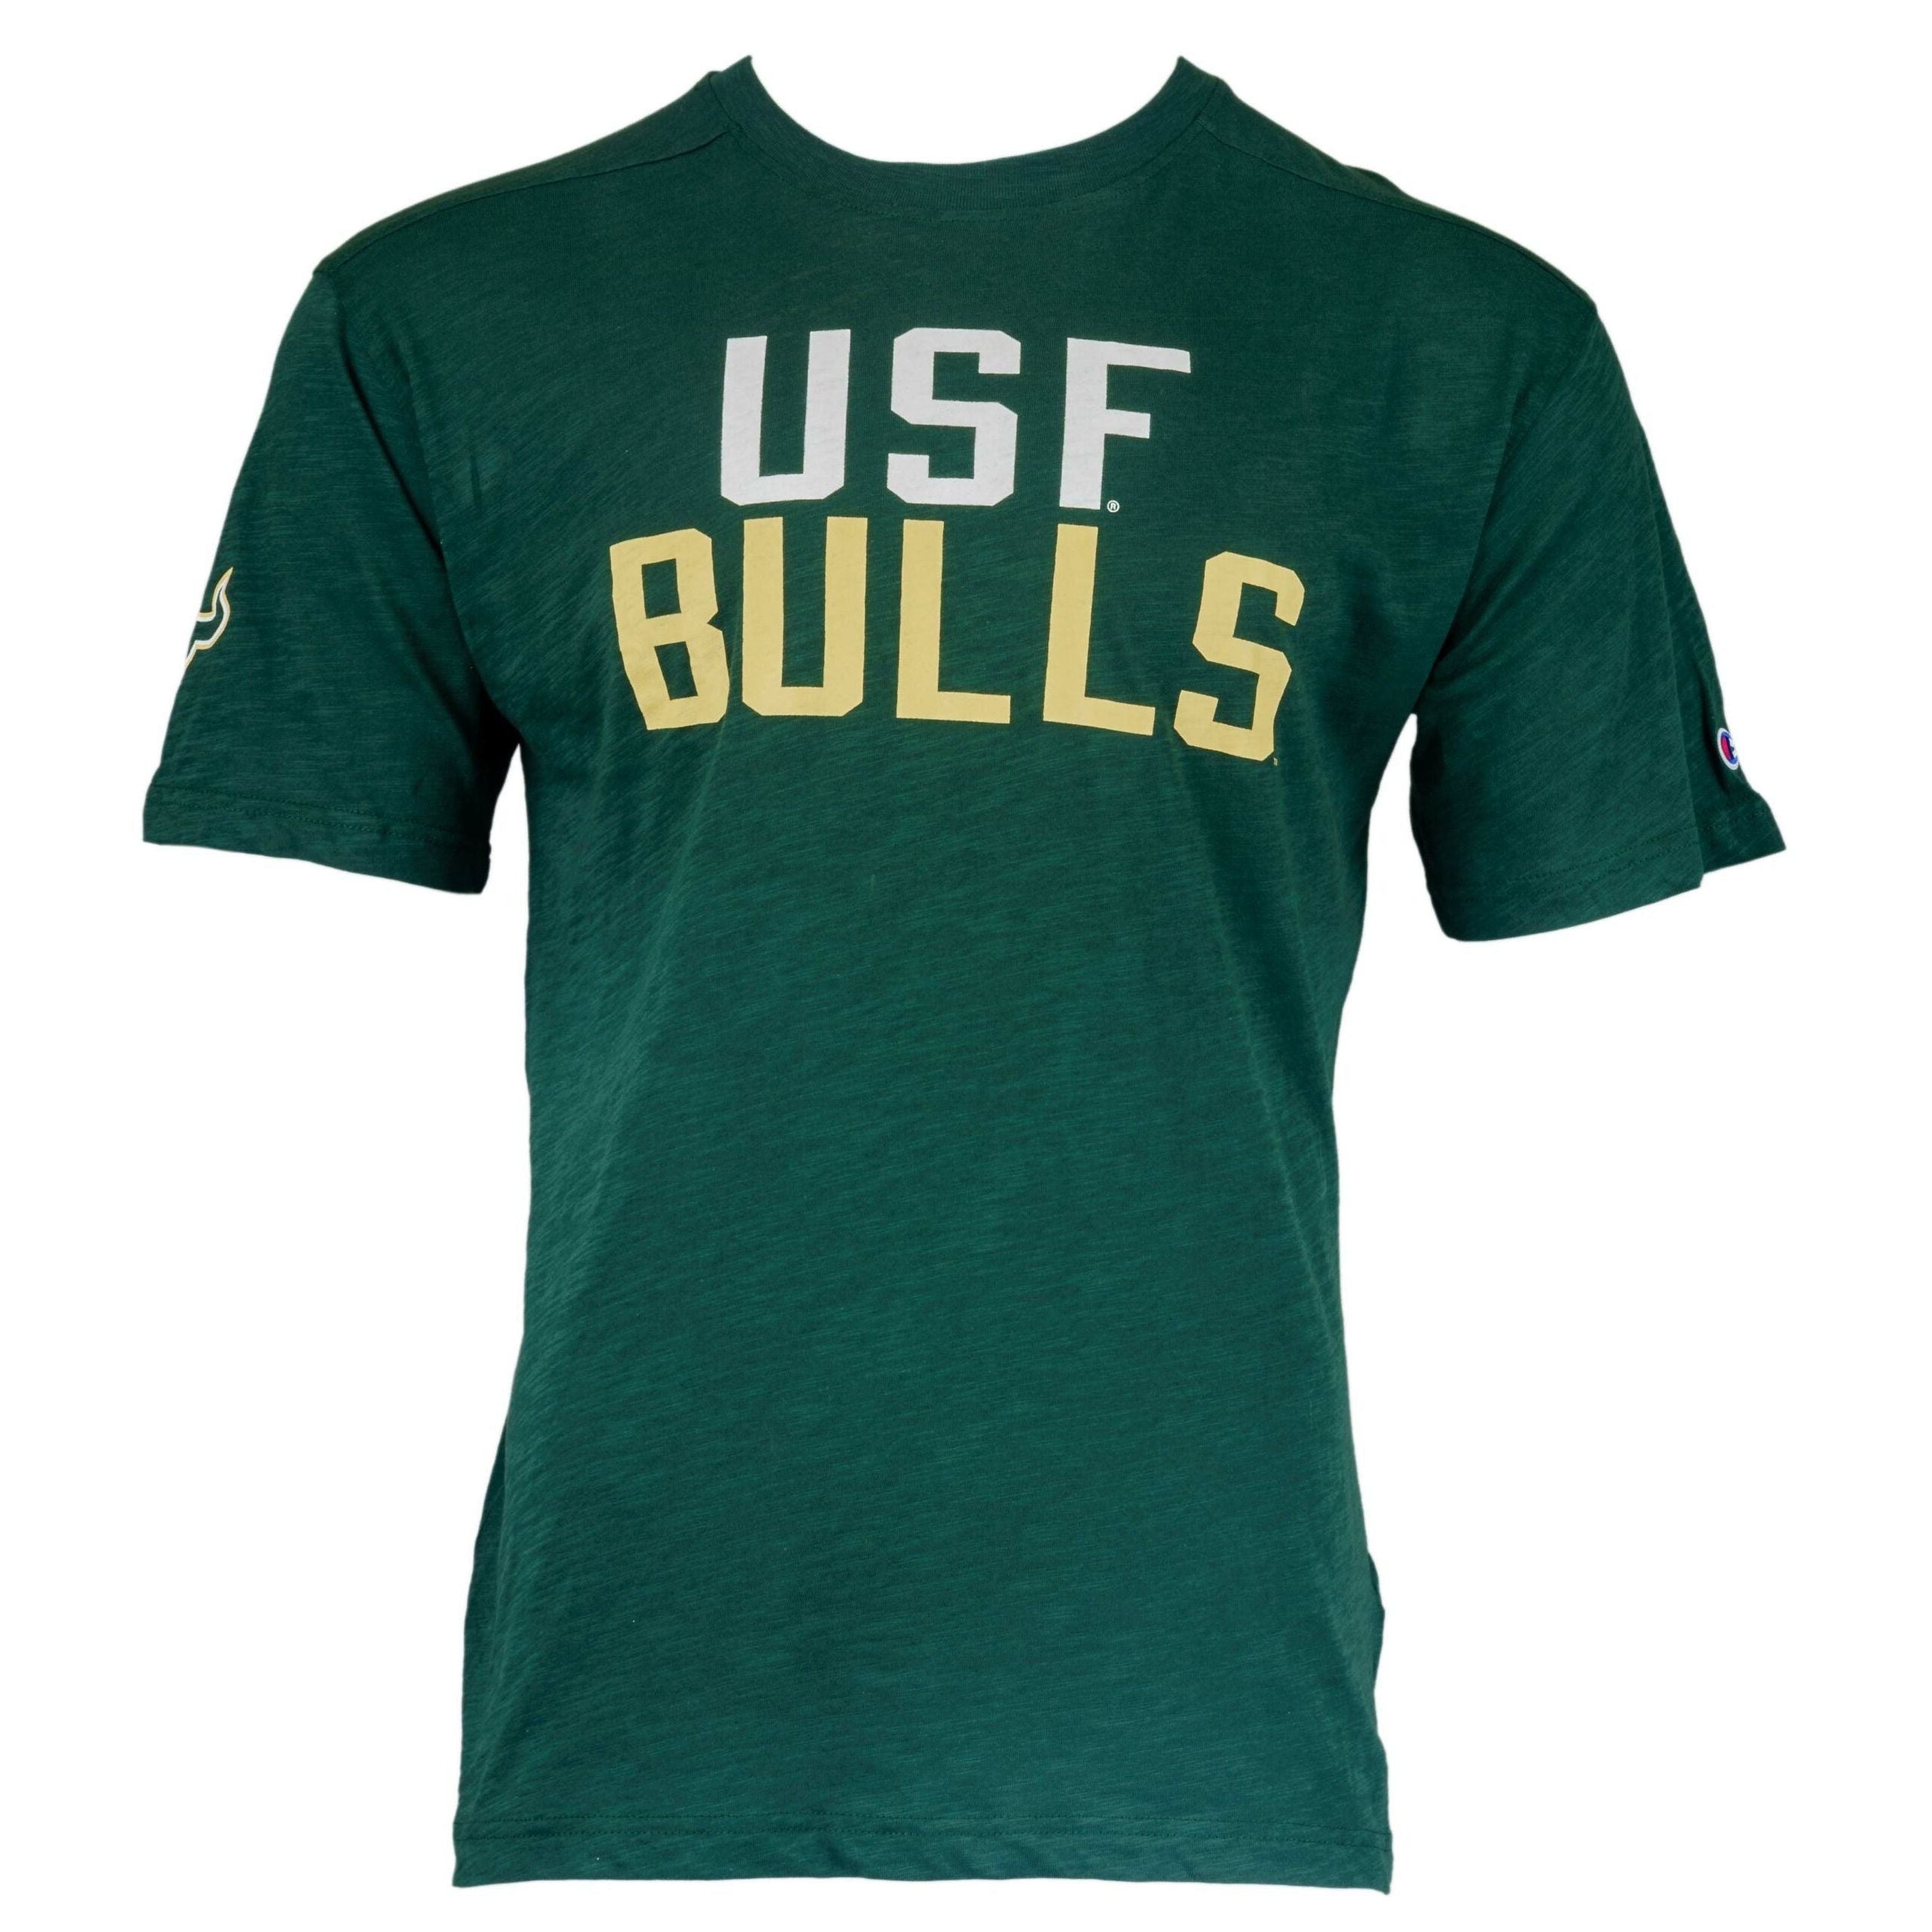 Champion Men's USF T-shirt - Officially Licensed University of South Florida Merchandise